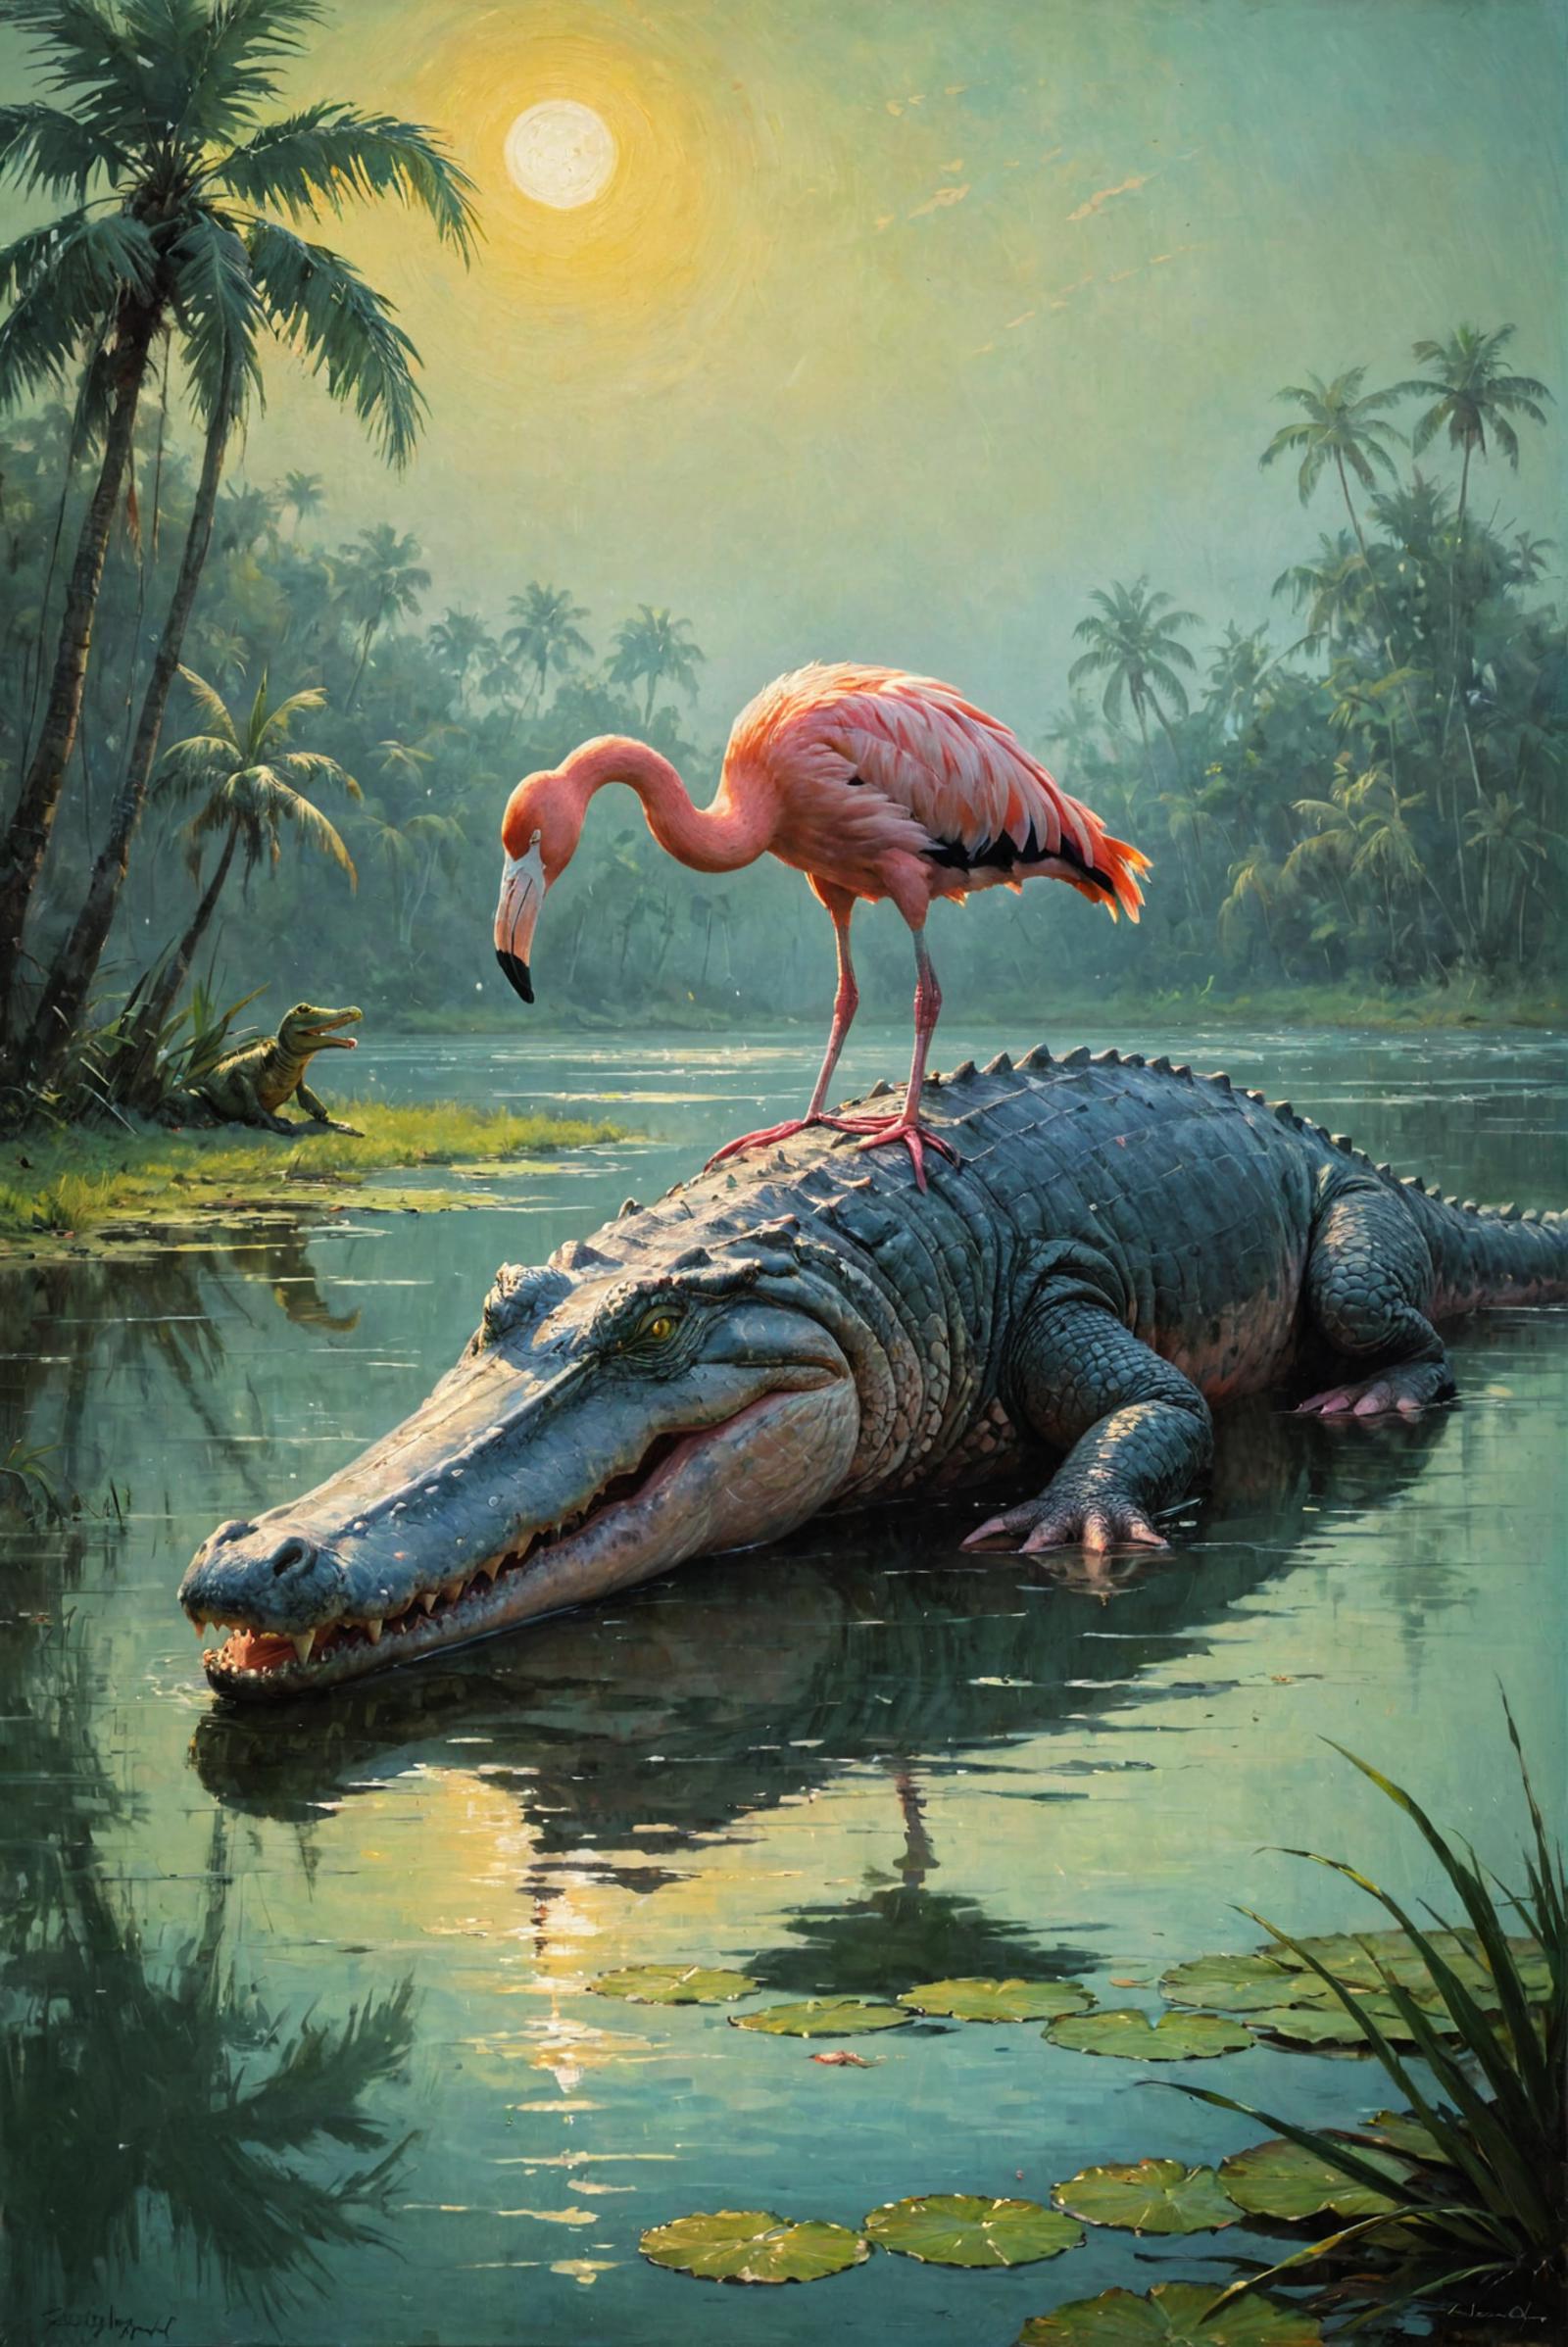 A pink flamingo perched on the back of a crocodile in a painting